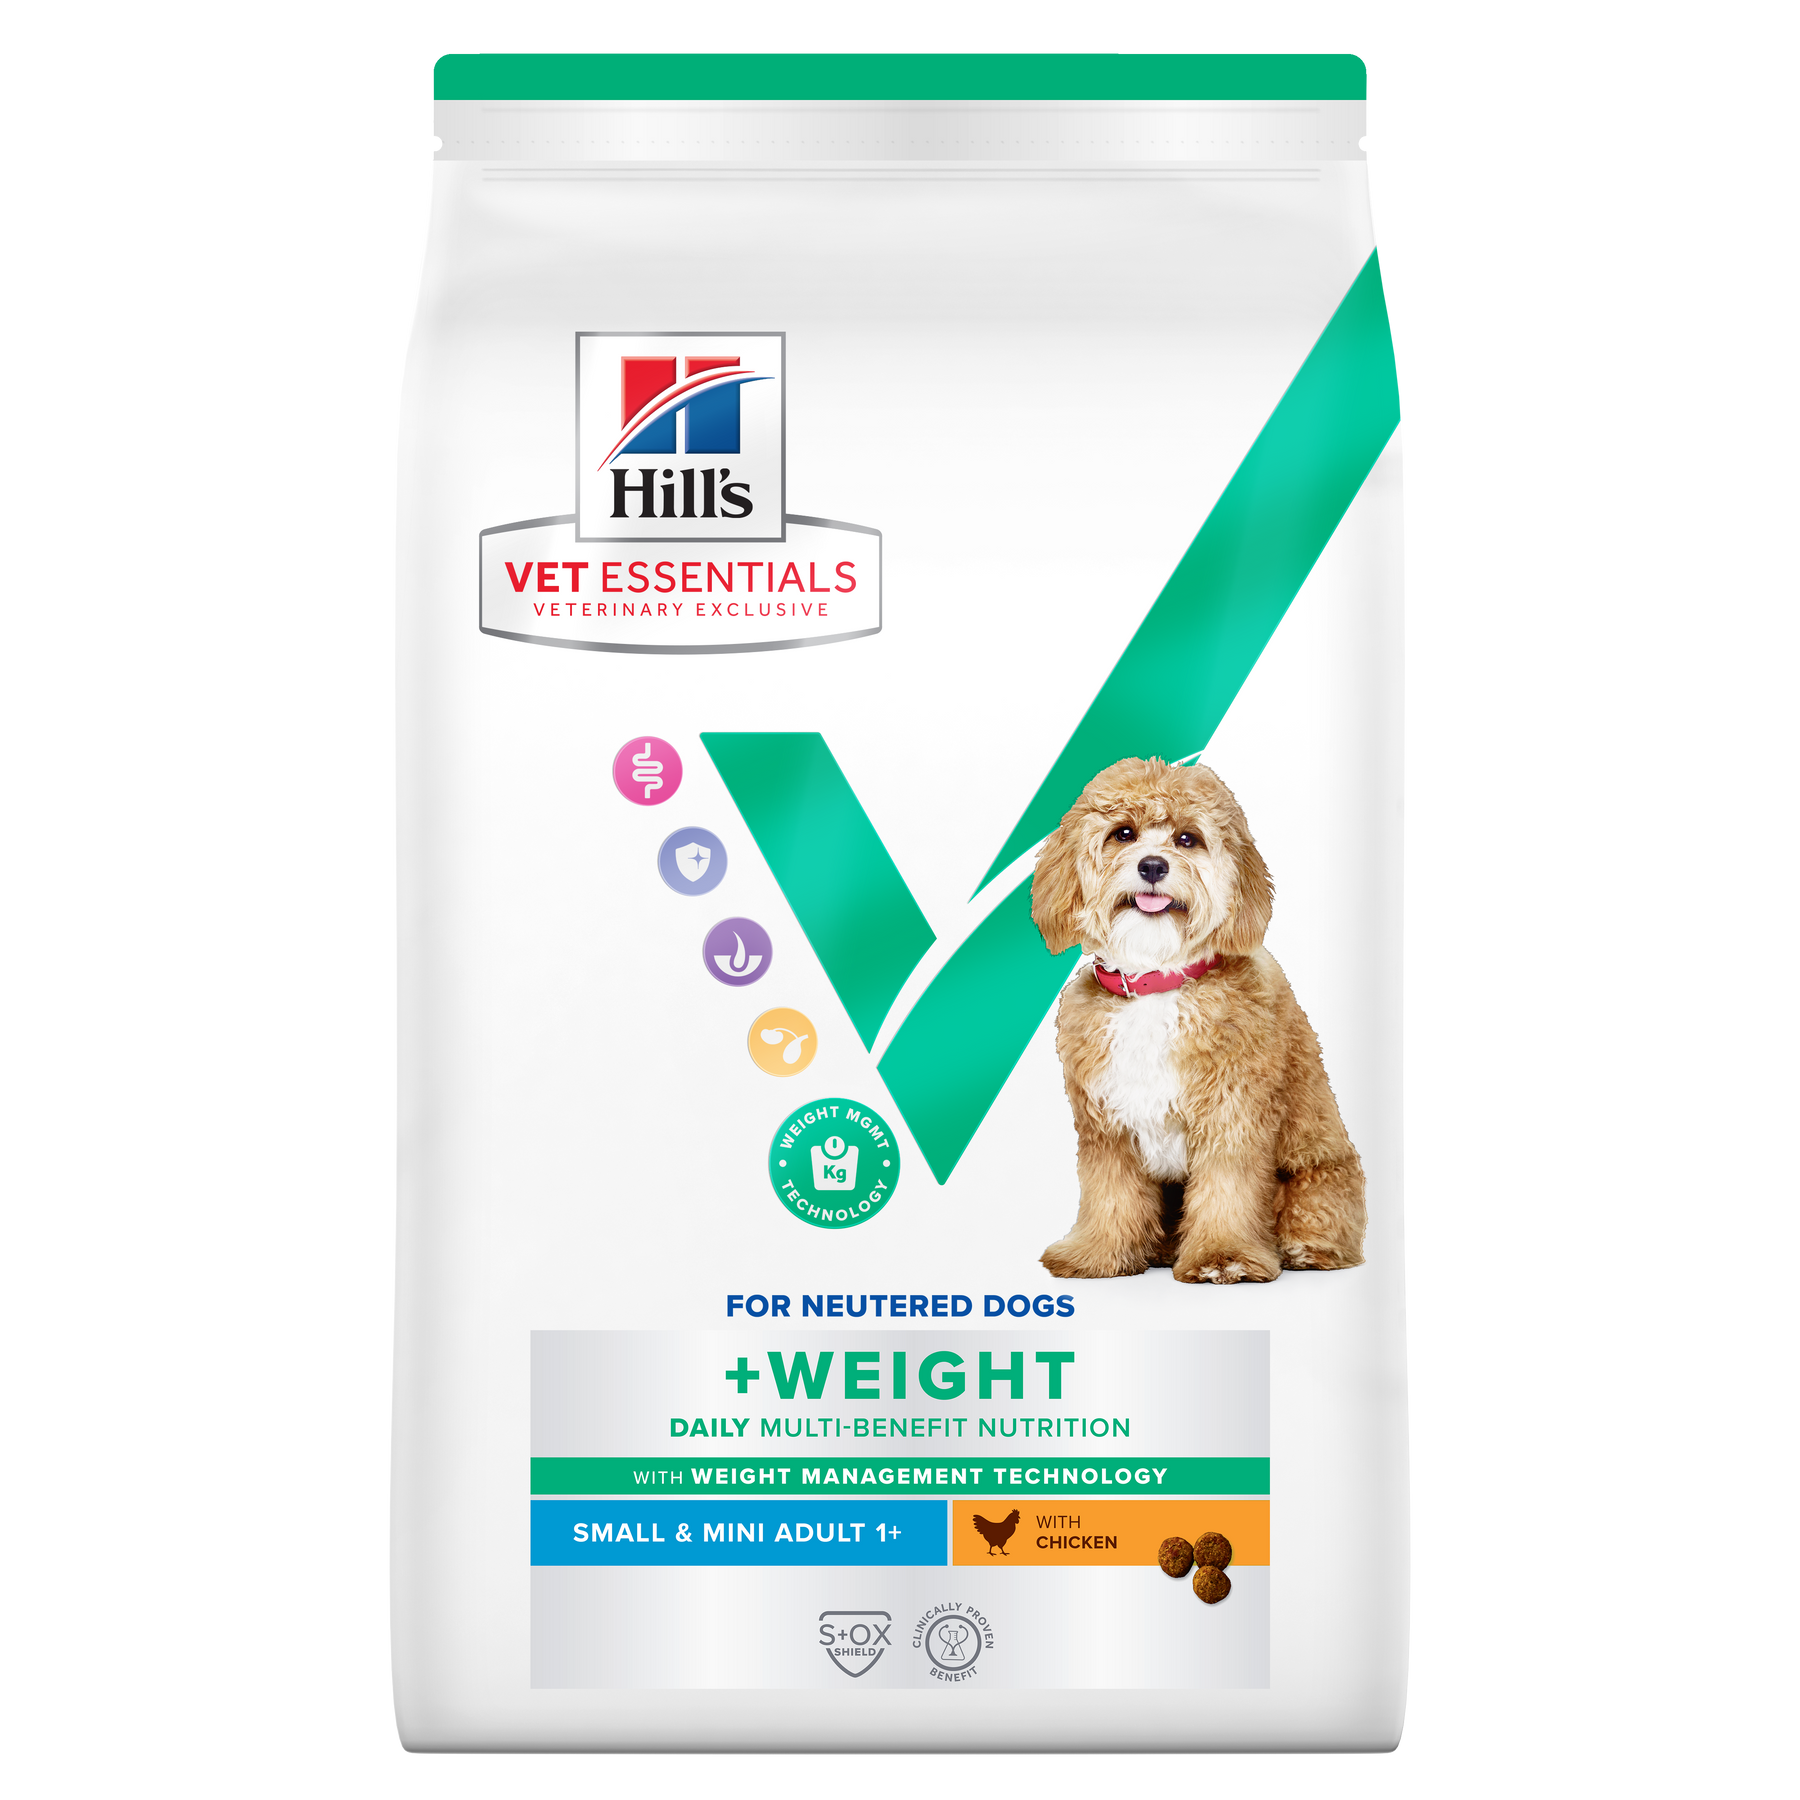 Hill's VET ESSENTIALS MULTI-BENEFIT + WEIGHT Adult 1+ Small & Mini Dry Dog Food with Chicken